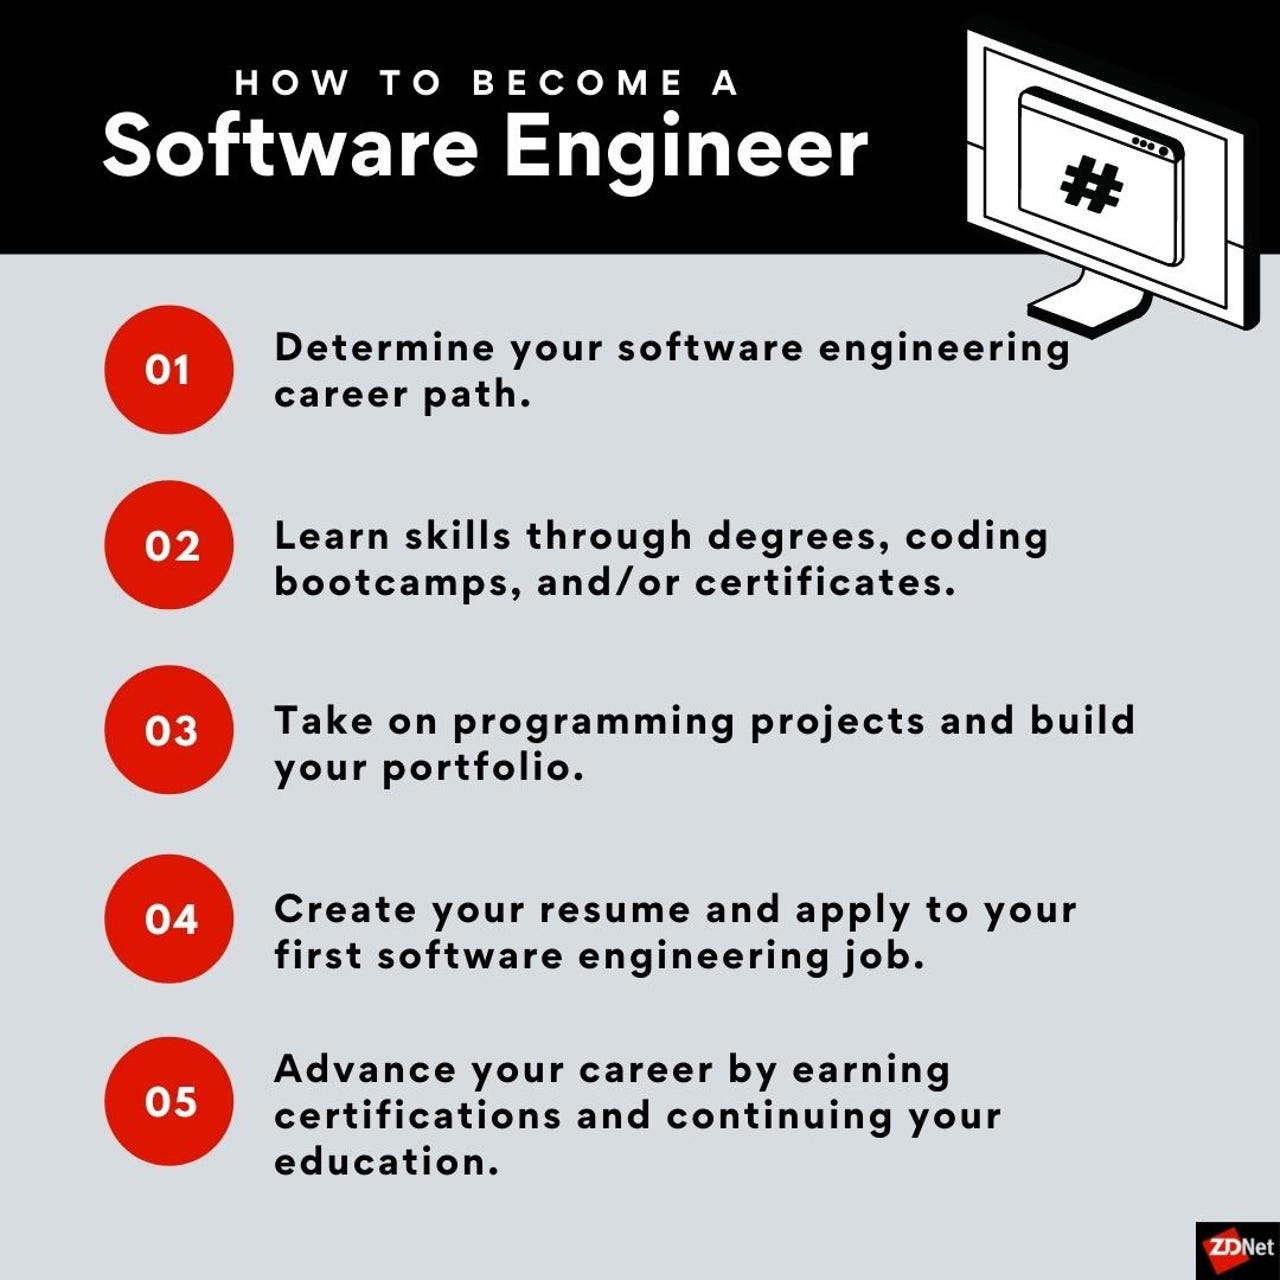 How to become a software engineer